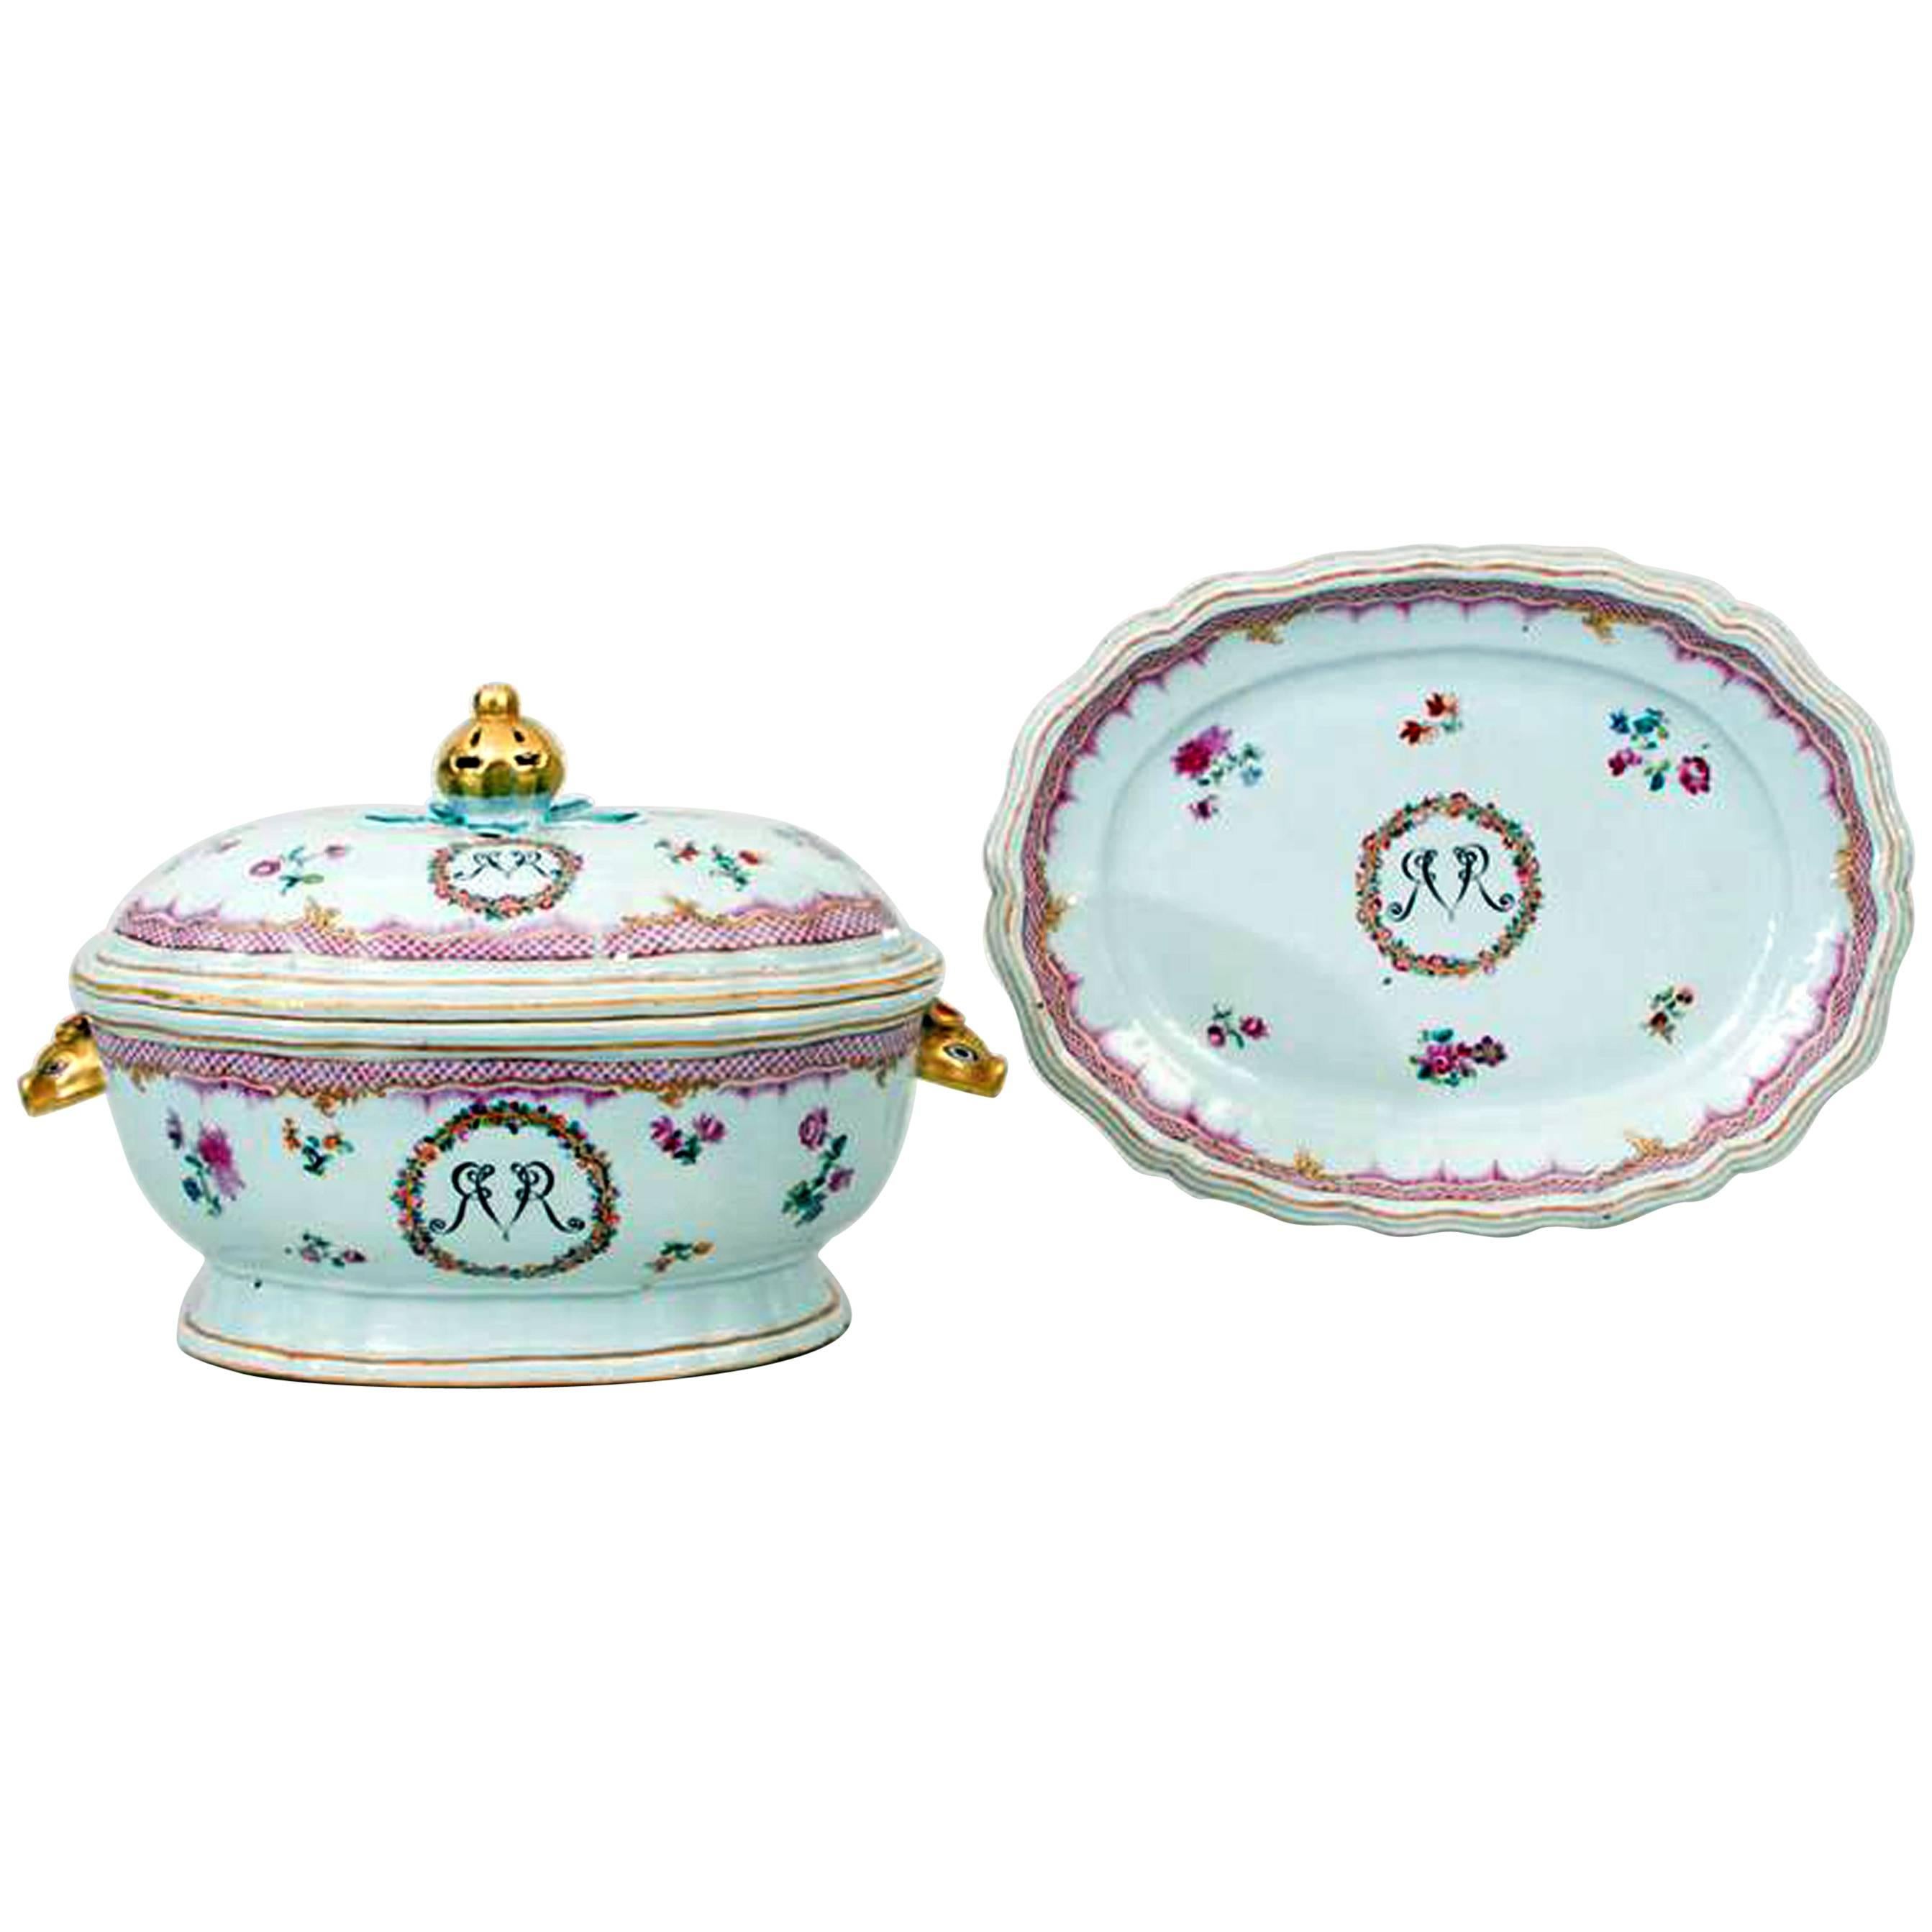 Chinese Export Swedish-market Porcelain Soup Tureen, Cover and Stand, circa 1775